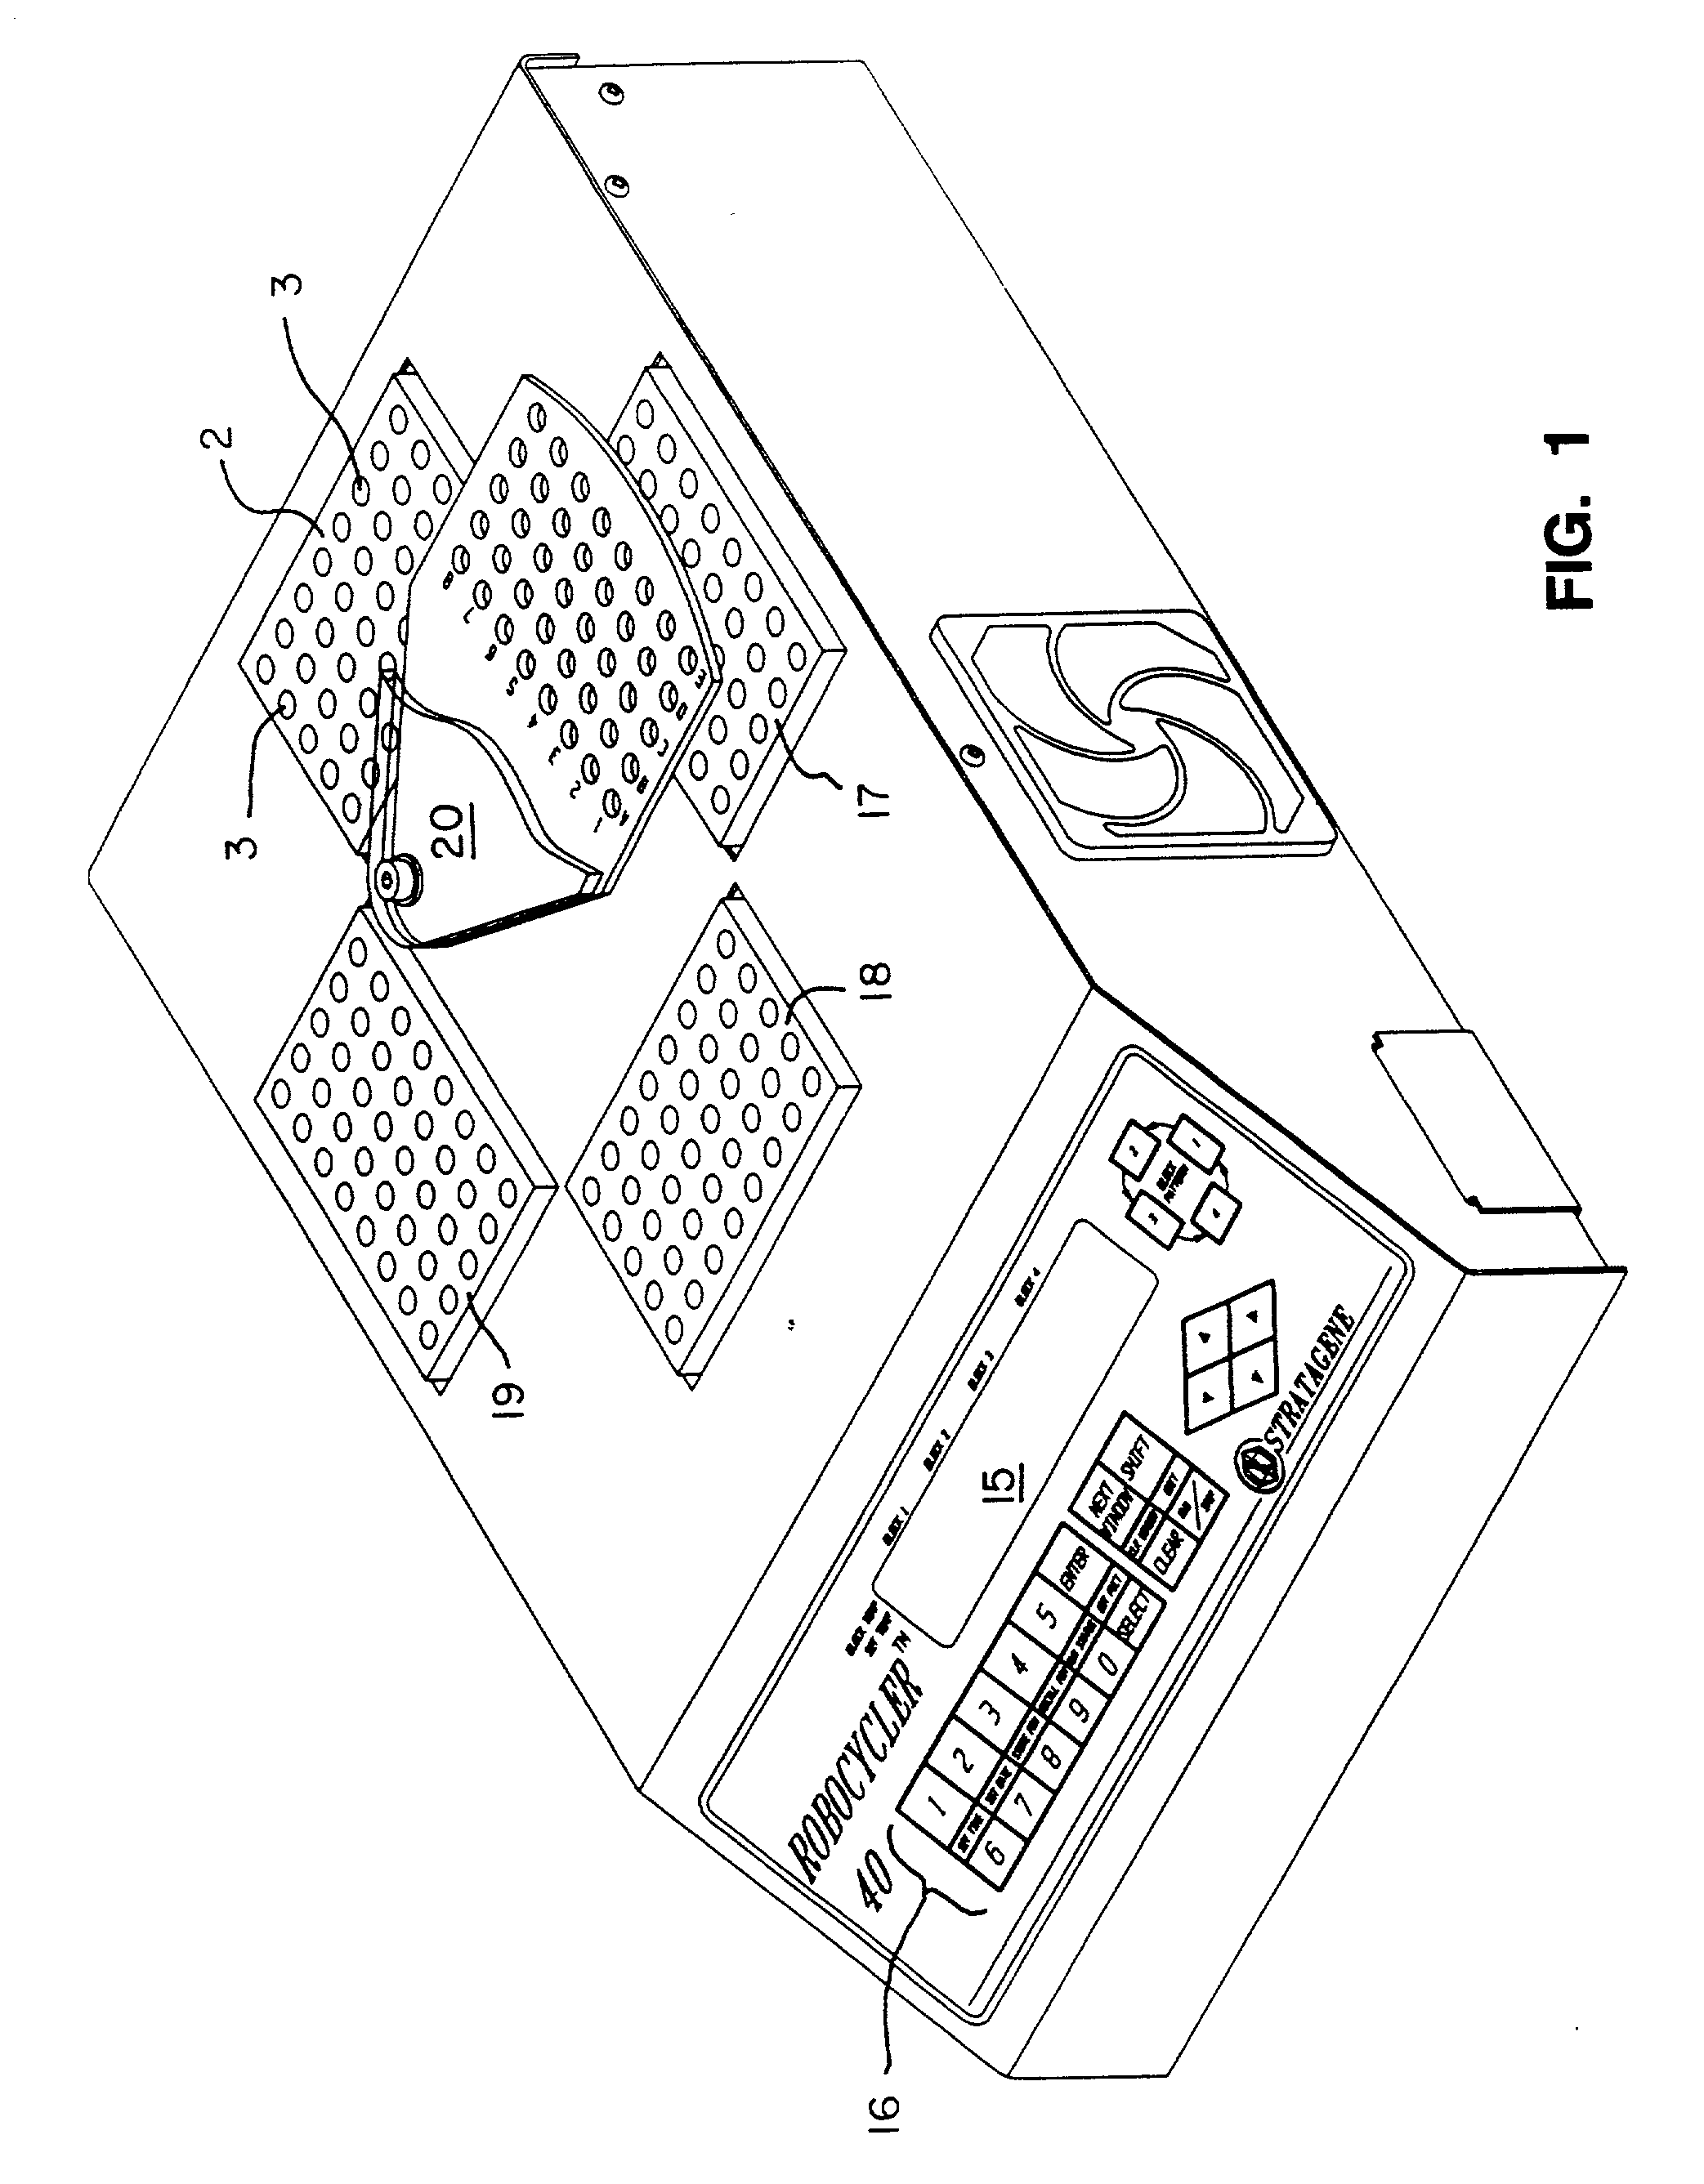 Thermal cycler including a temperature gradient block